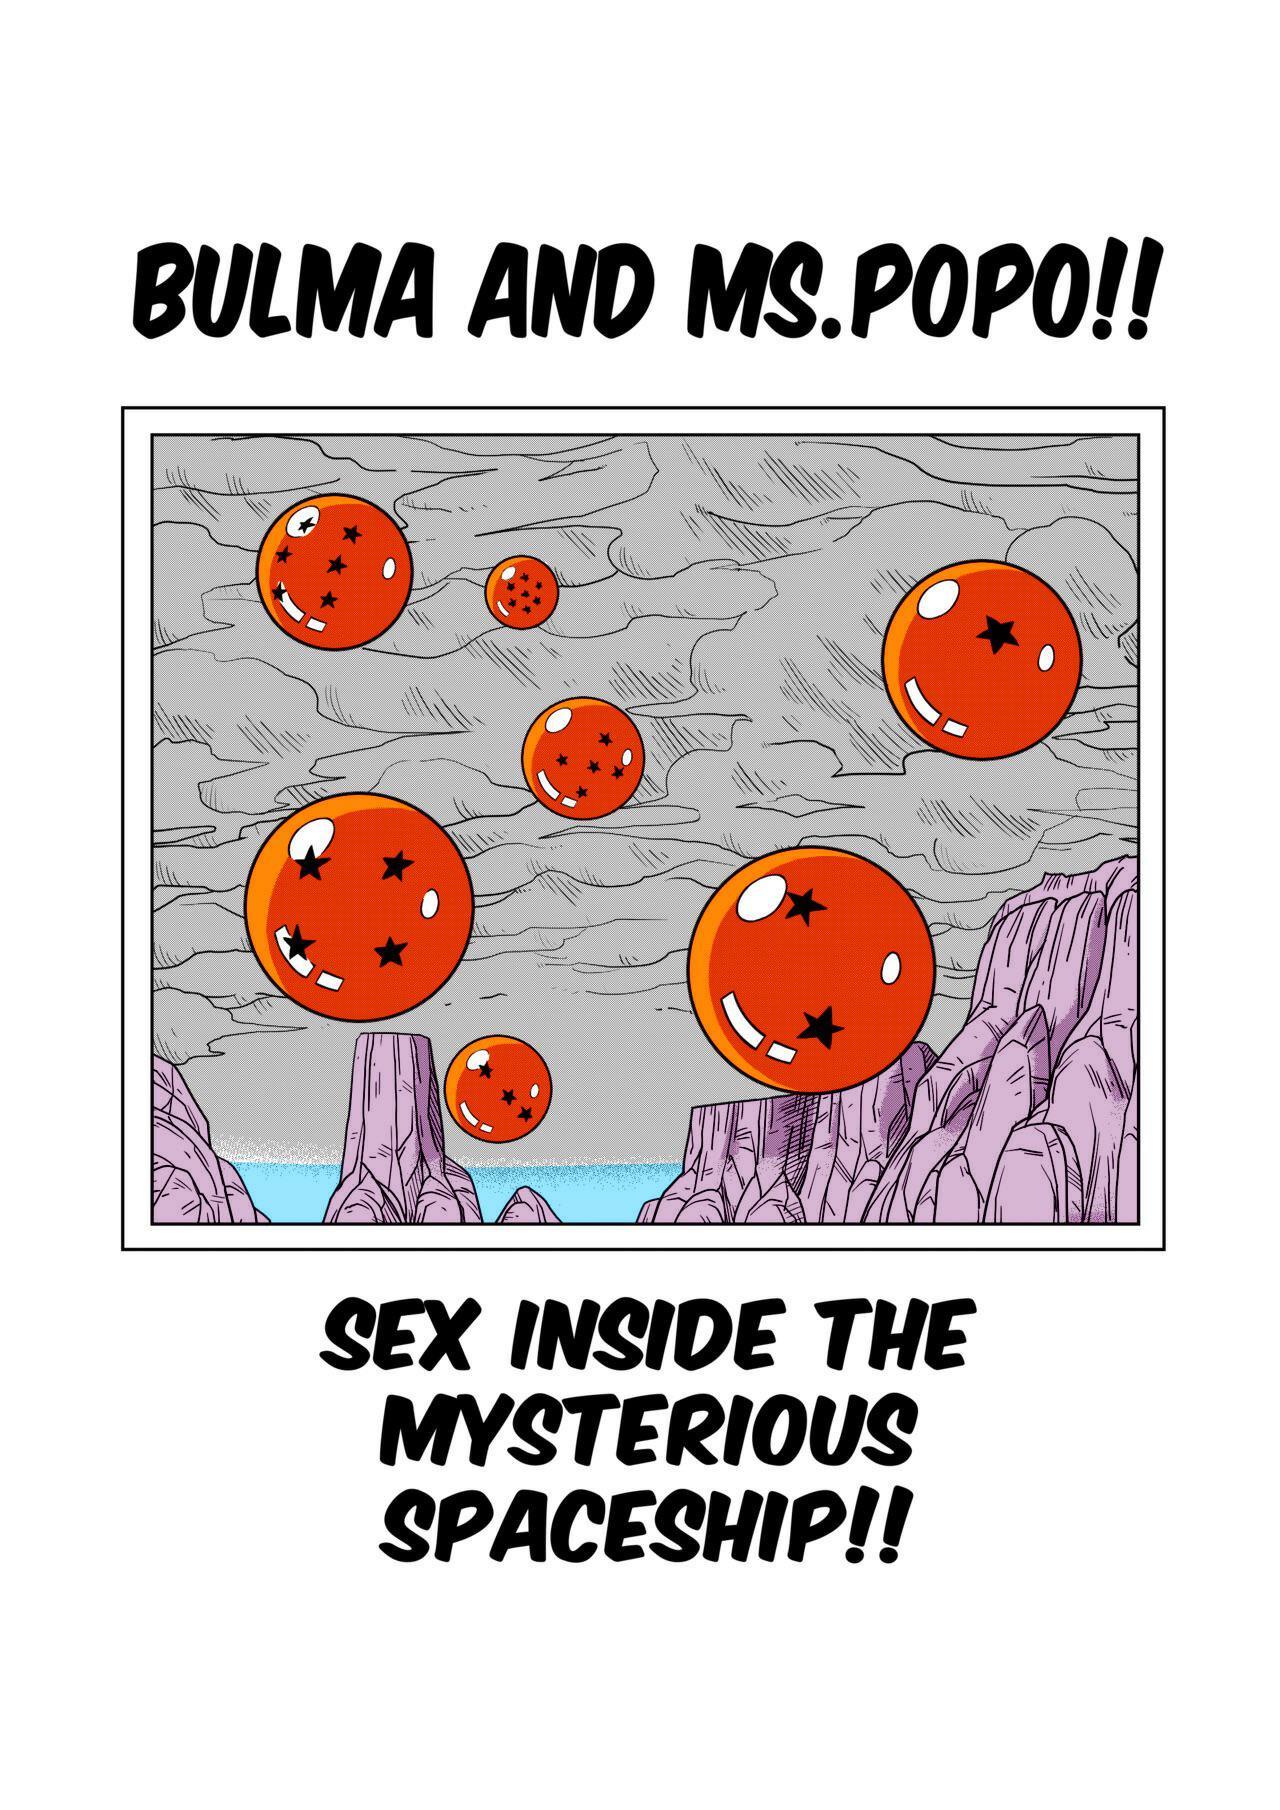 Blowing [Yamamoto] Dagon Ball - Bulma Meets Mr. Popo - Sex Inside the Mysterious Spaceship [English] (decensored) - Dragon ball z Japanese - Picture 3